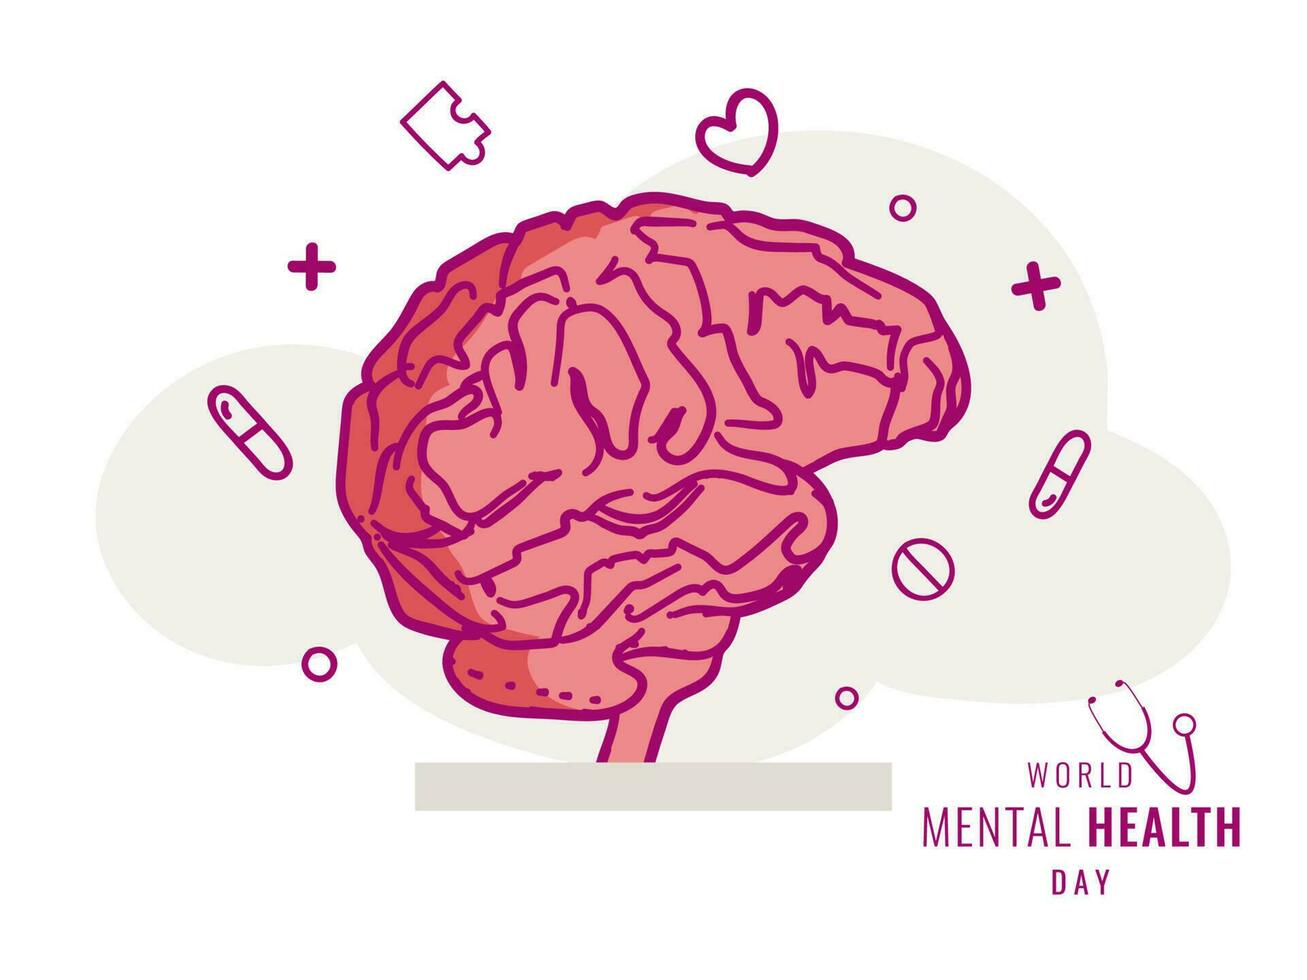 Vector illustration of human brain on abstract background for World Mental Health Day poster or template design.